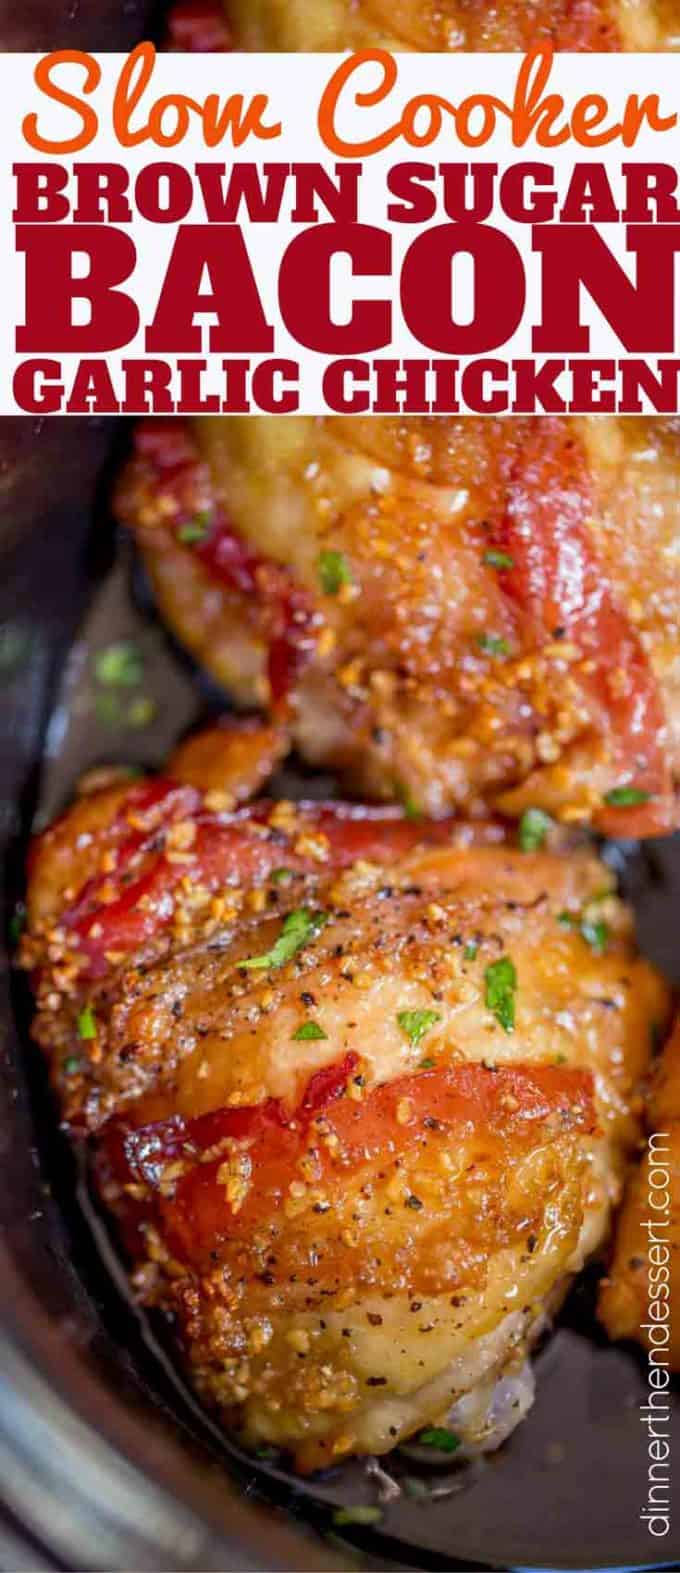 The easiest most delicious slow cooker chicken recipe we've made with chicken, bacon, brown sugar and garlic!